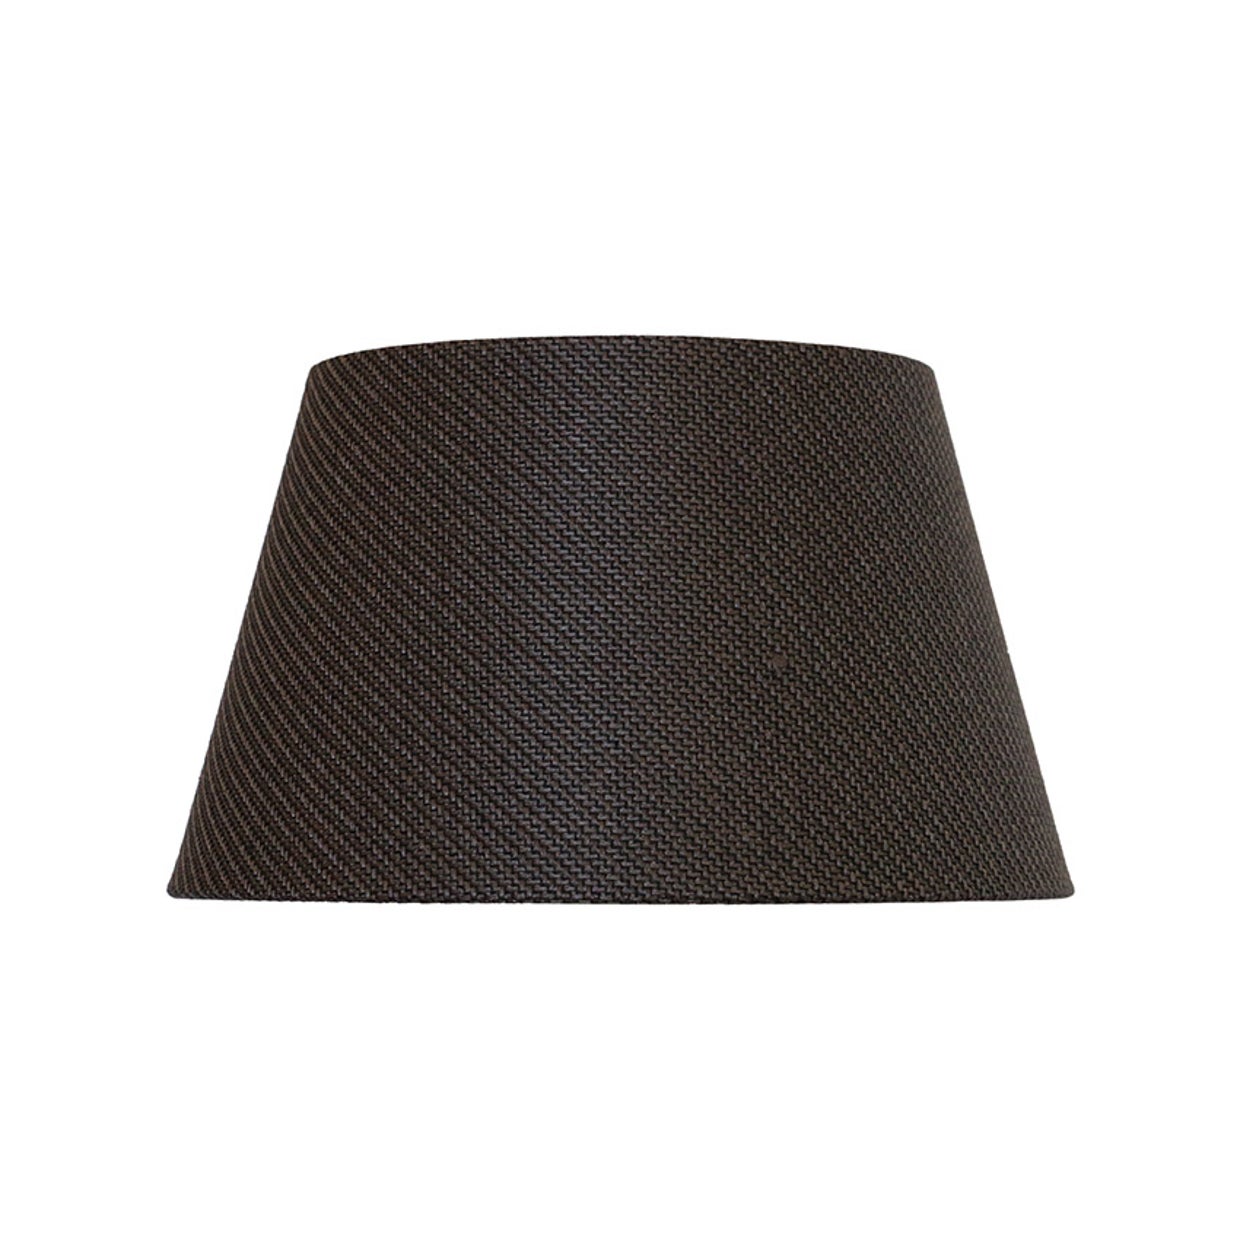 Woven Charcoal 36cm Tapered Drum Lampshade